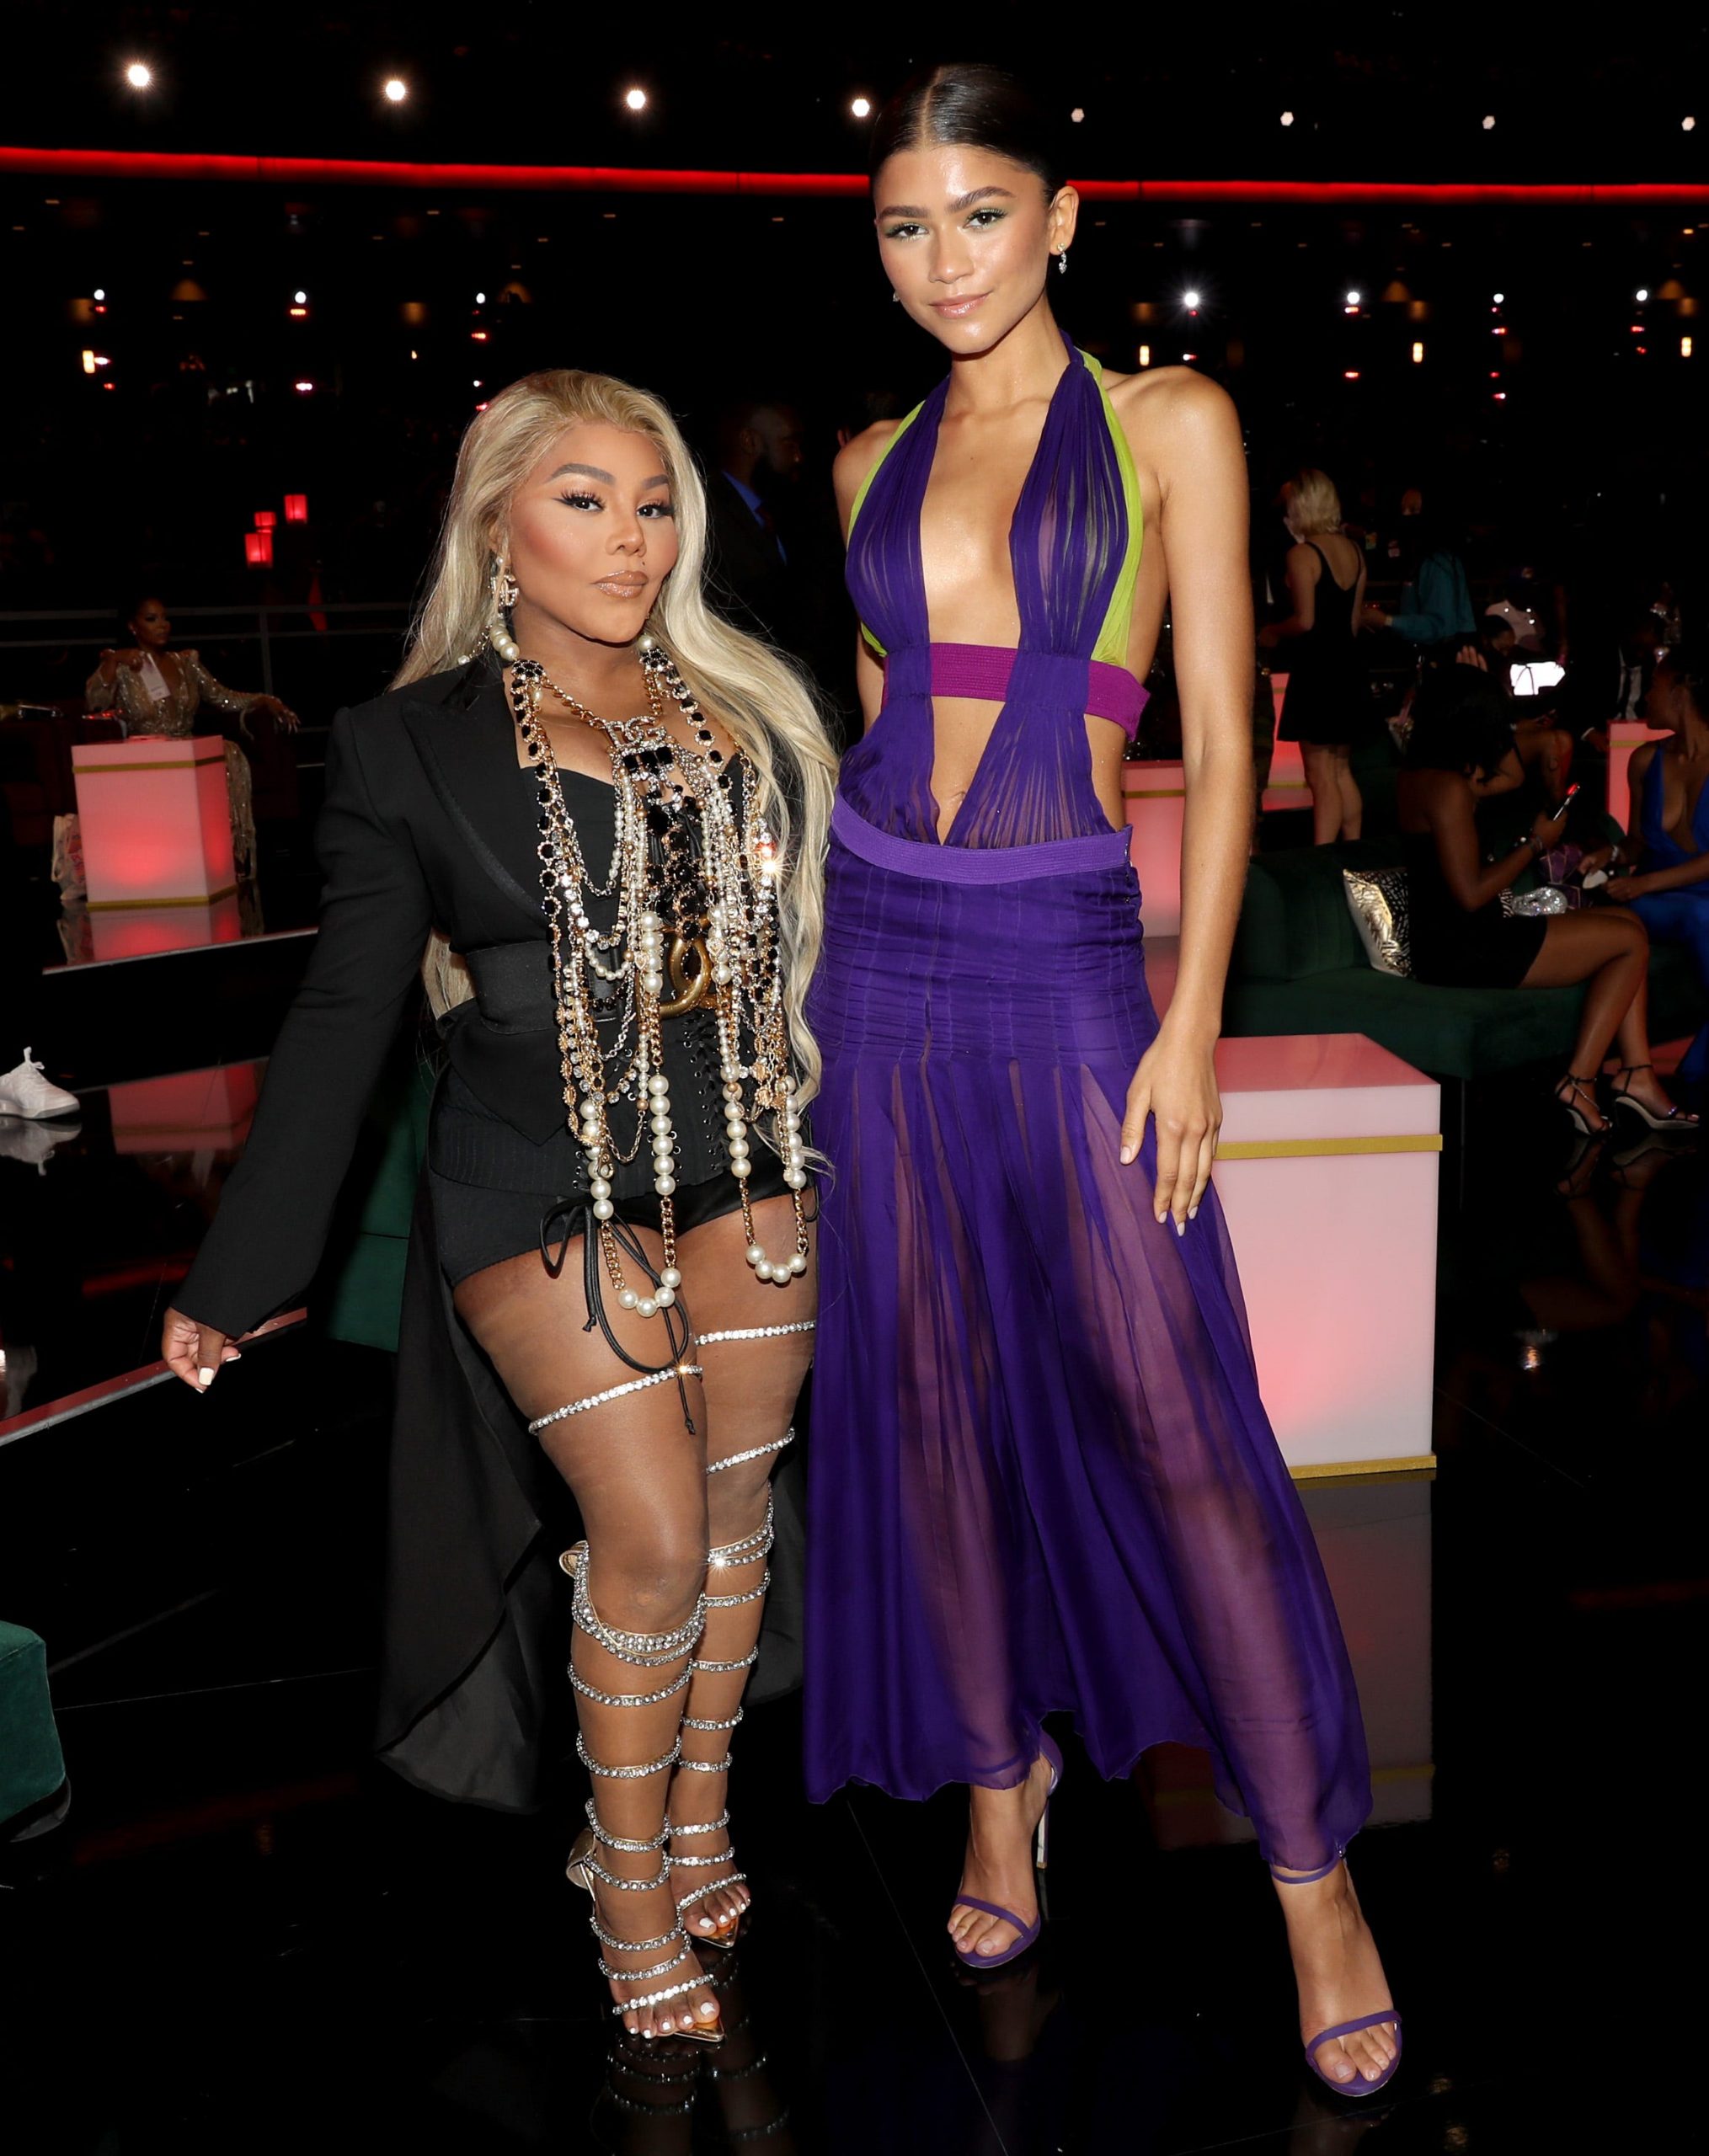 Zendaya (right) posed with Lil' Kim (left) at the BET Awards while wearing a floor-length version of a vintage Versace look previously worn by Beyoncé.